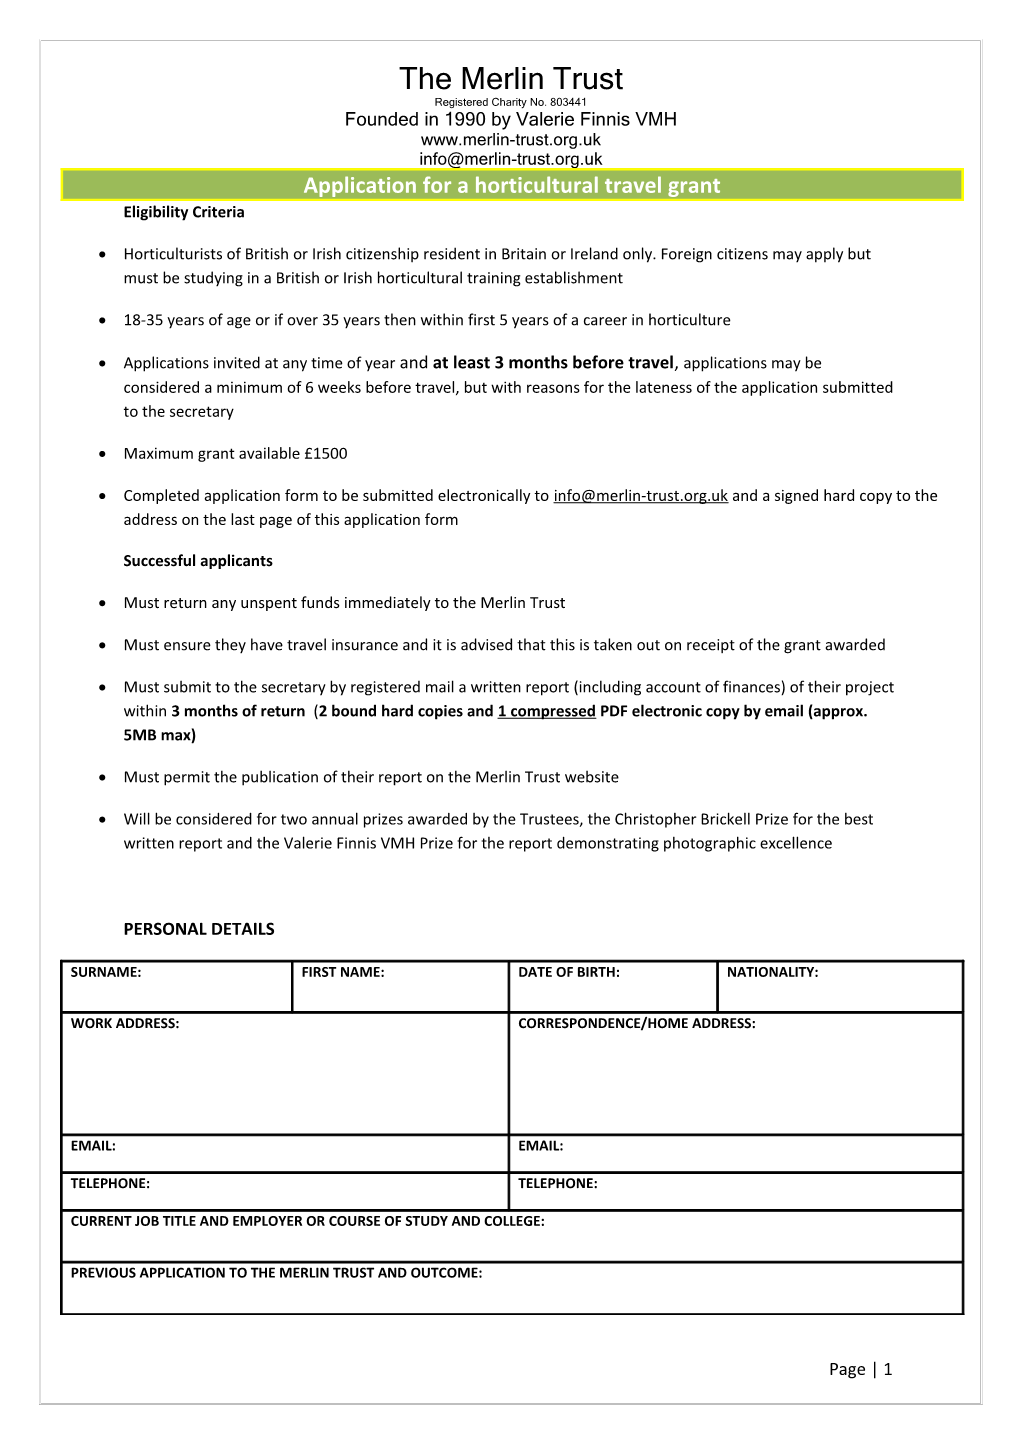 Application for a Horticultural Travel Grant